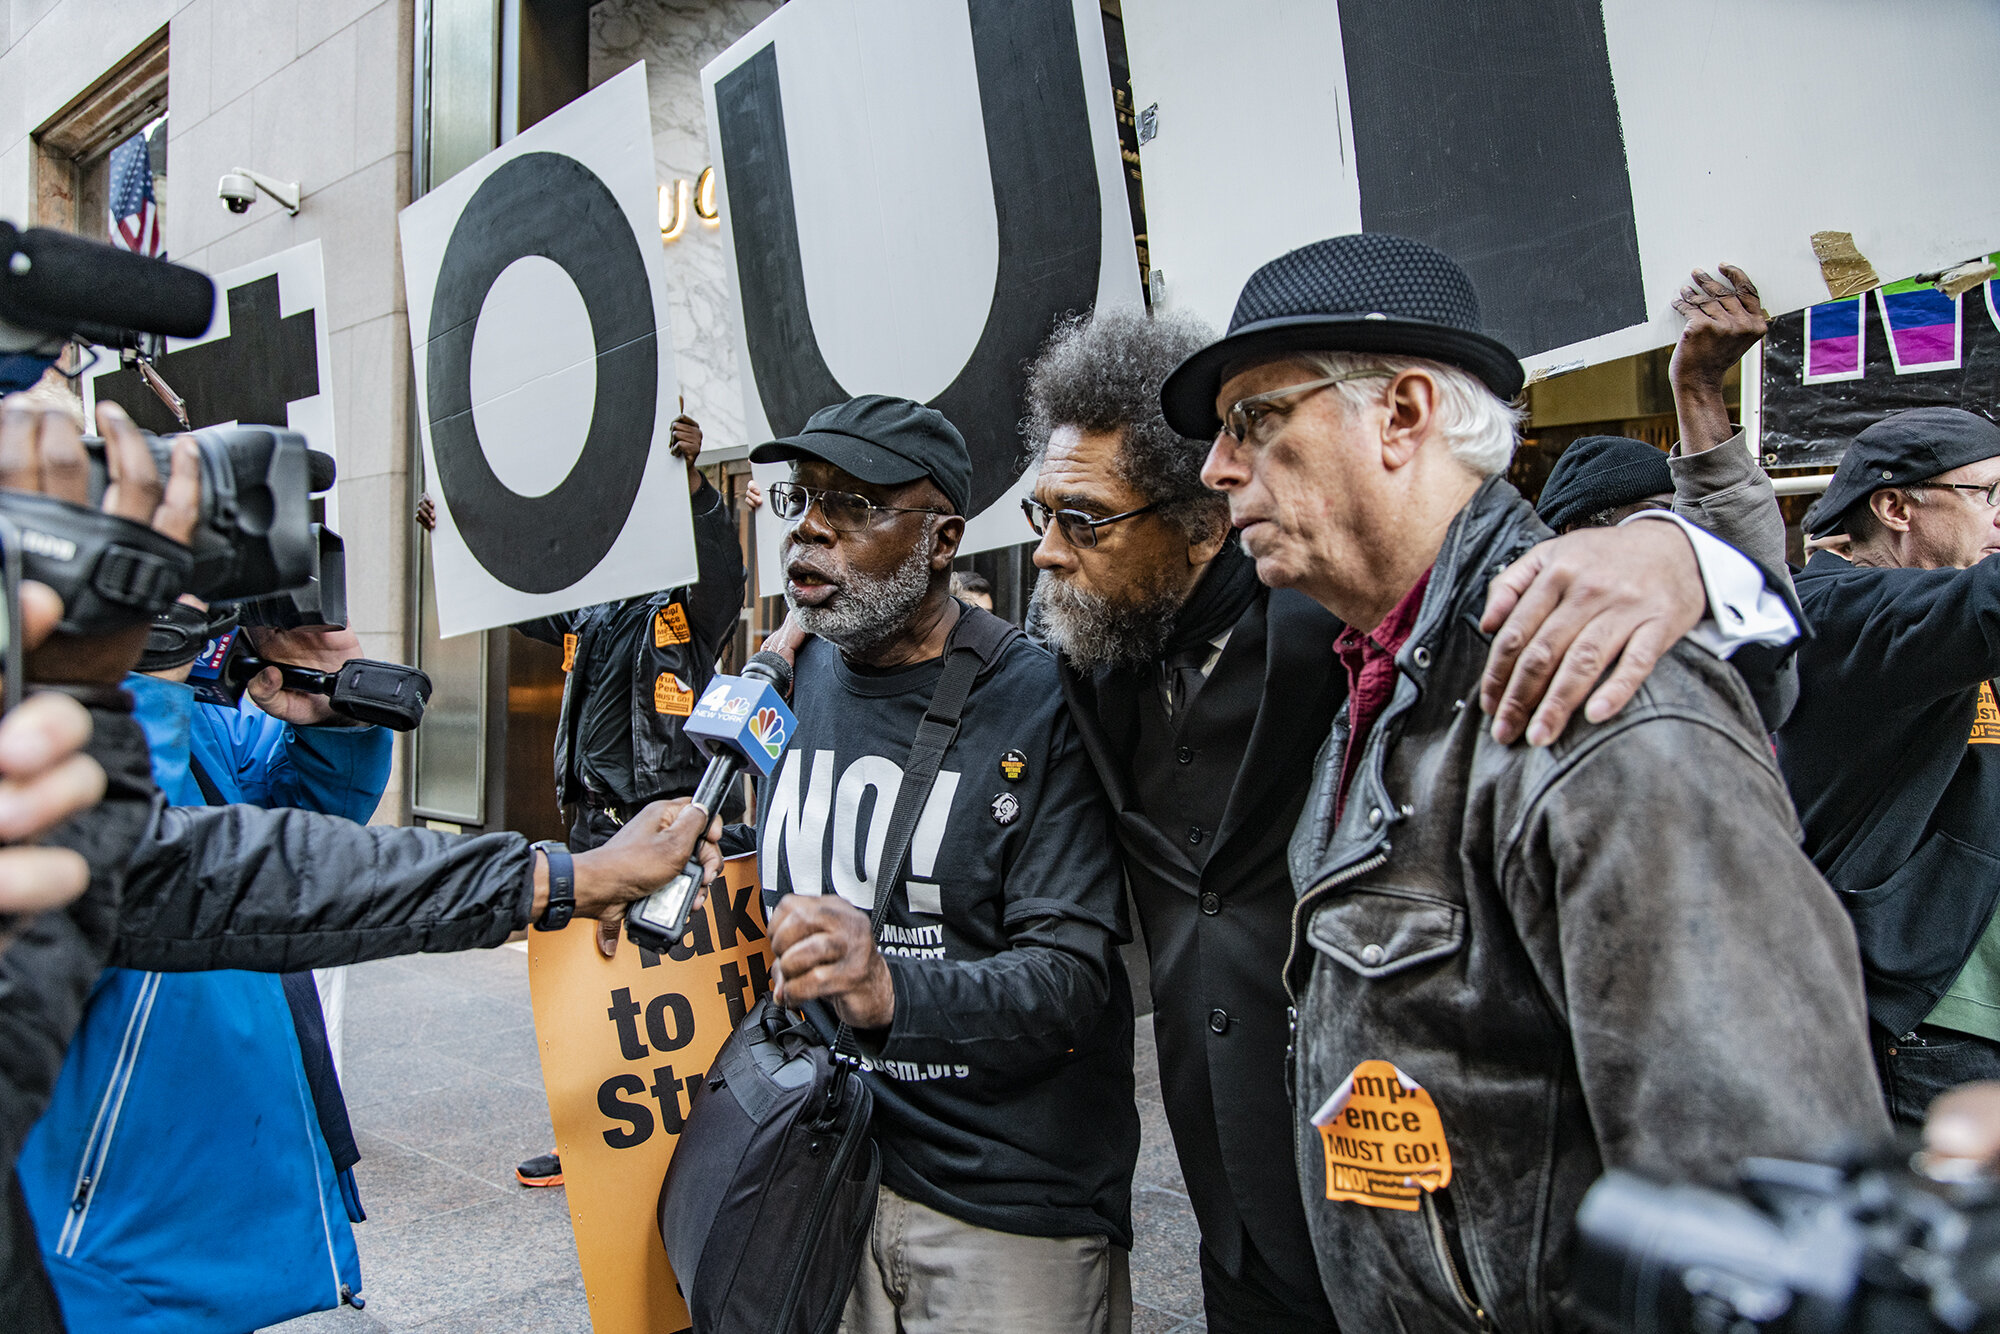 OUTNOW_Protest_2019_NYC-2765.jpg